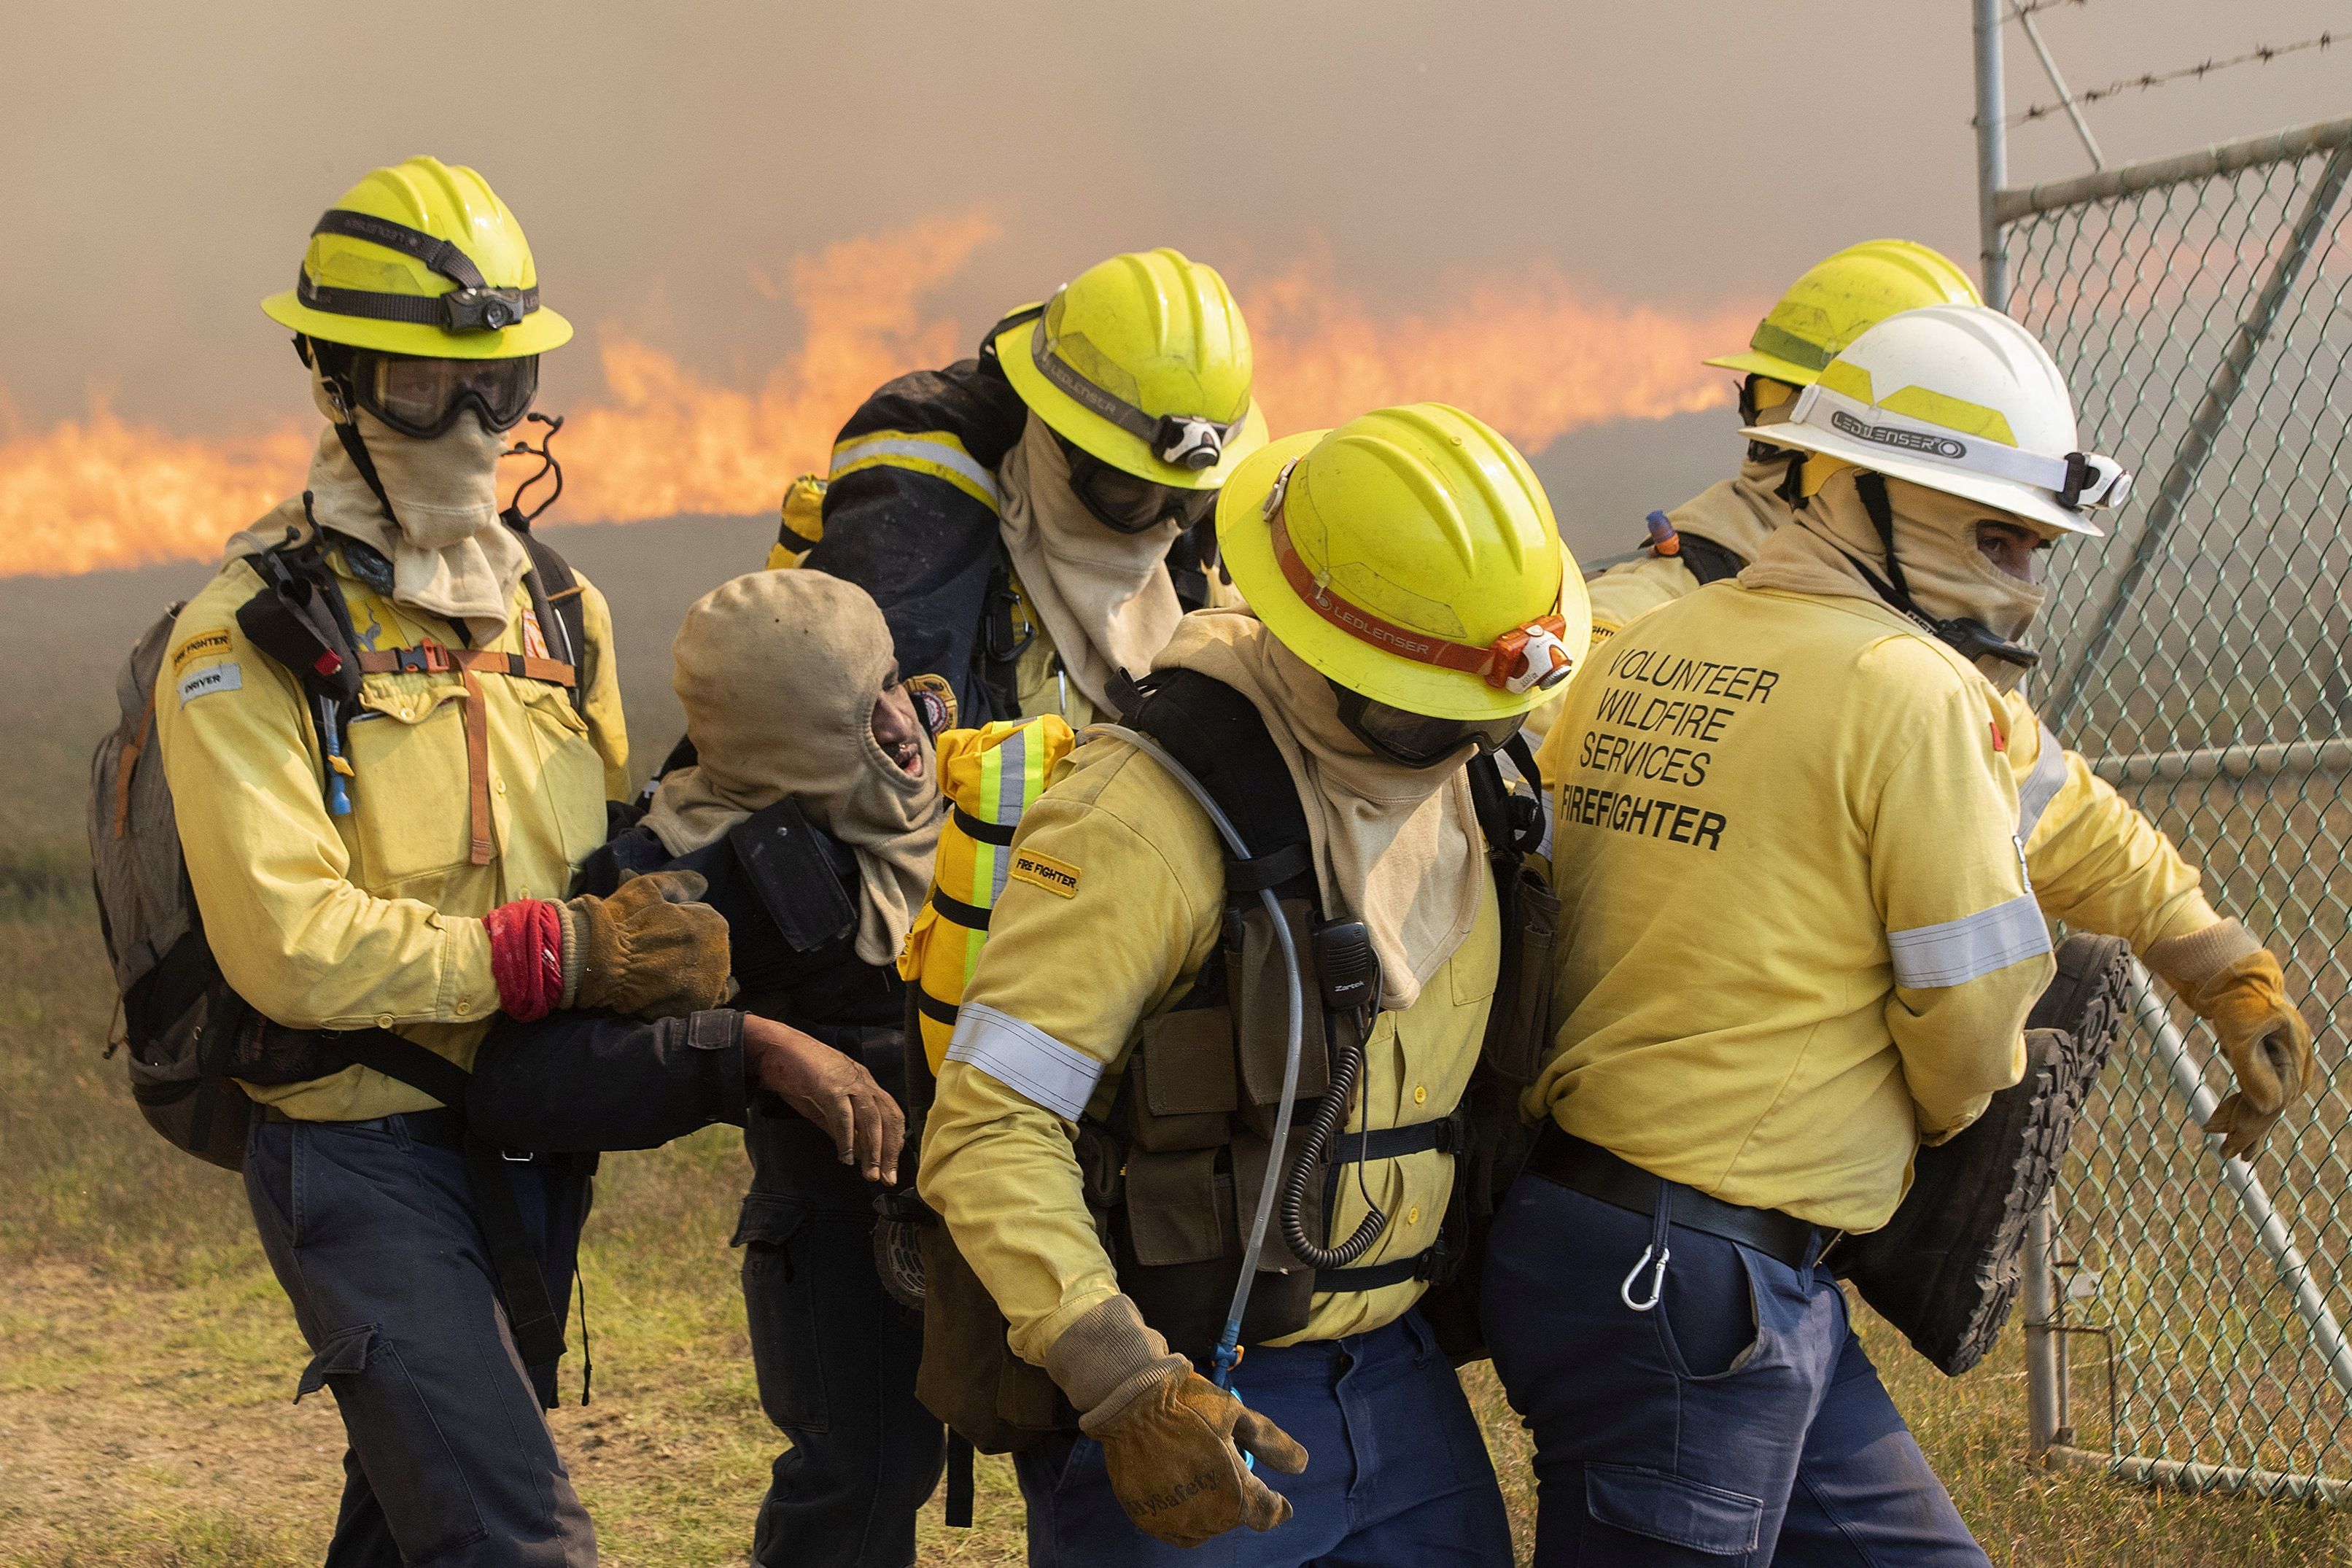  Firefighters carry a colleague who collapsed due to the smoke and the heat, as a forest fire burns out of control on the foothills of Table Mountain in Cape Town